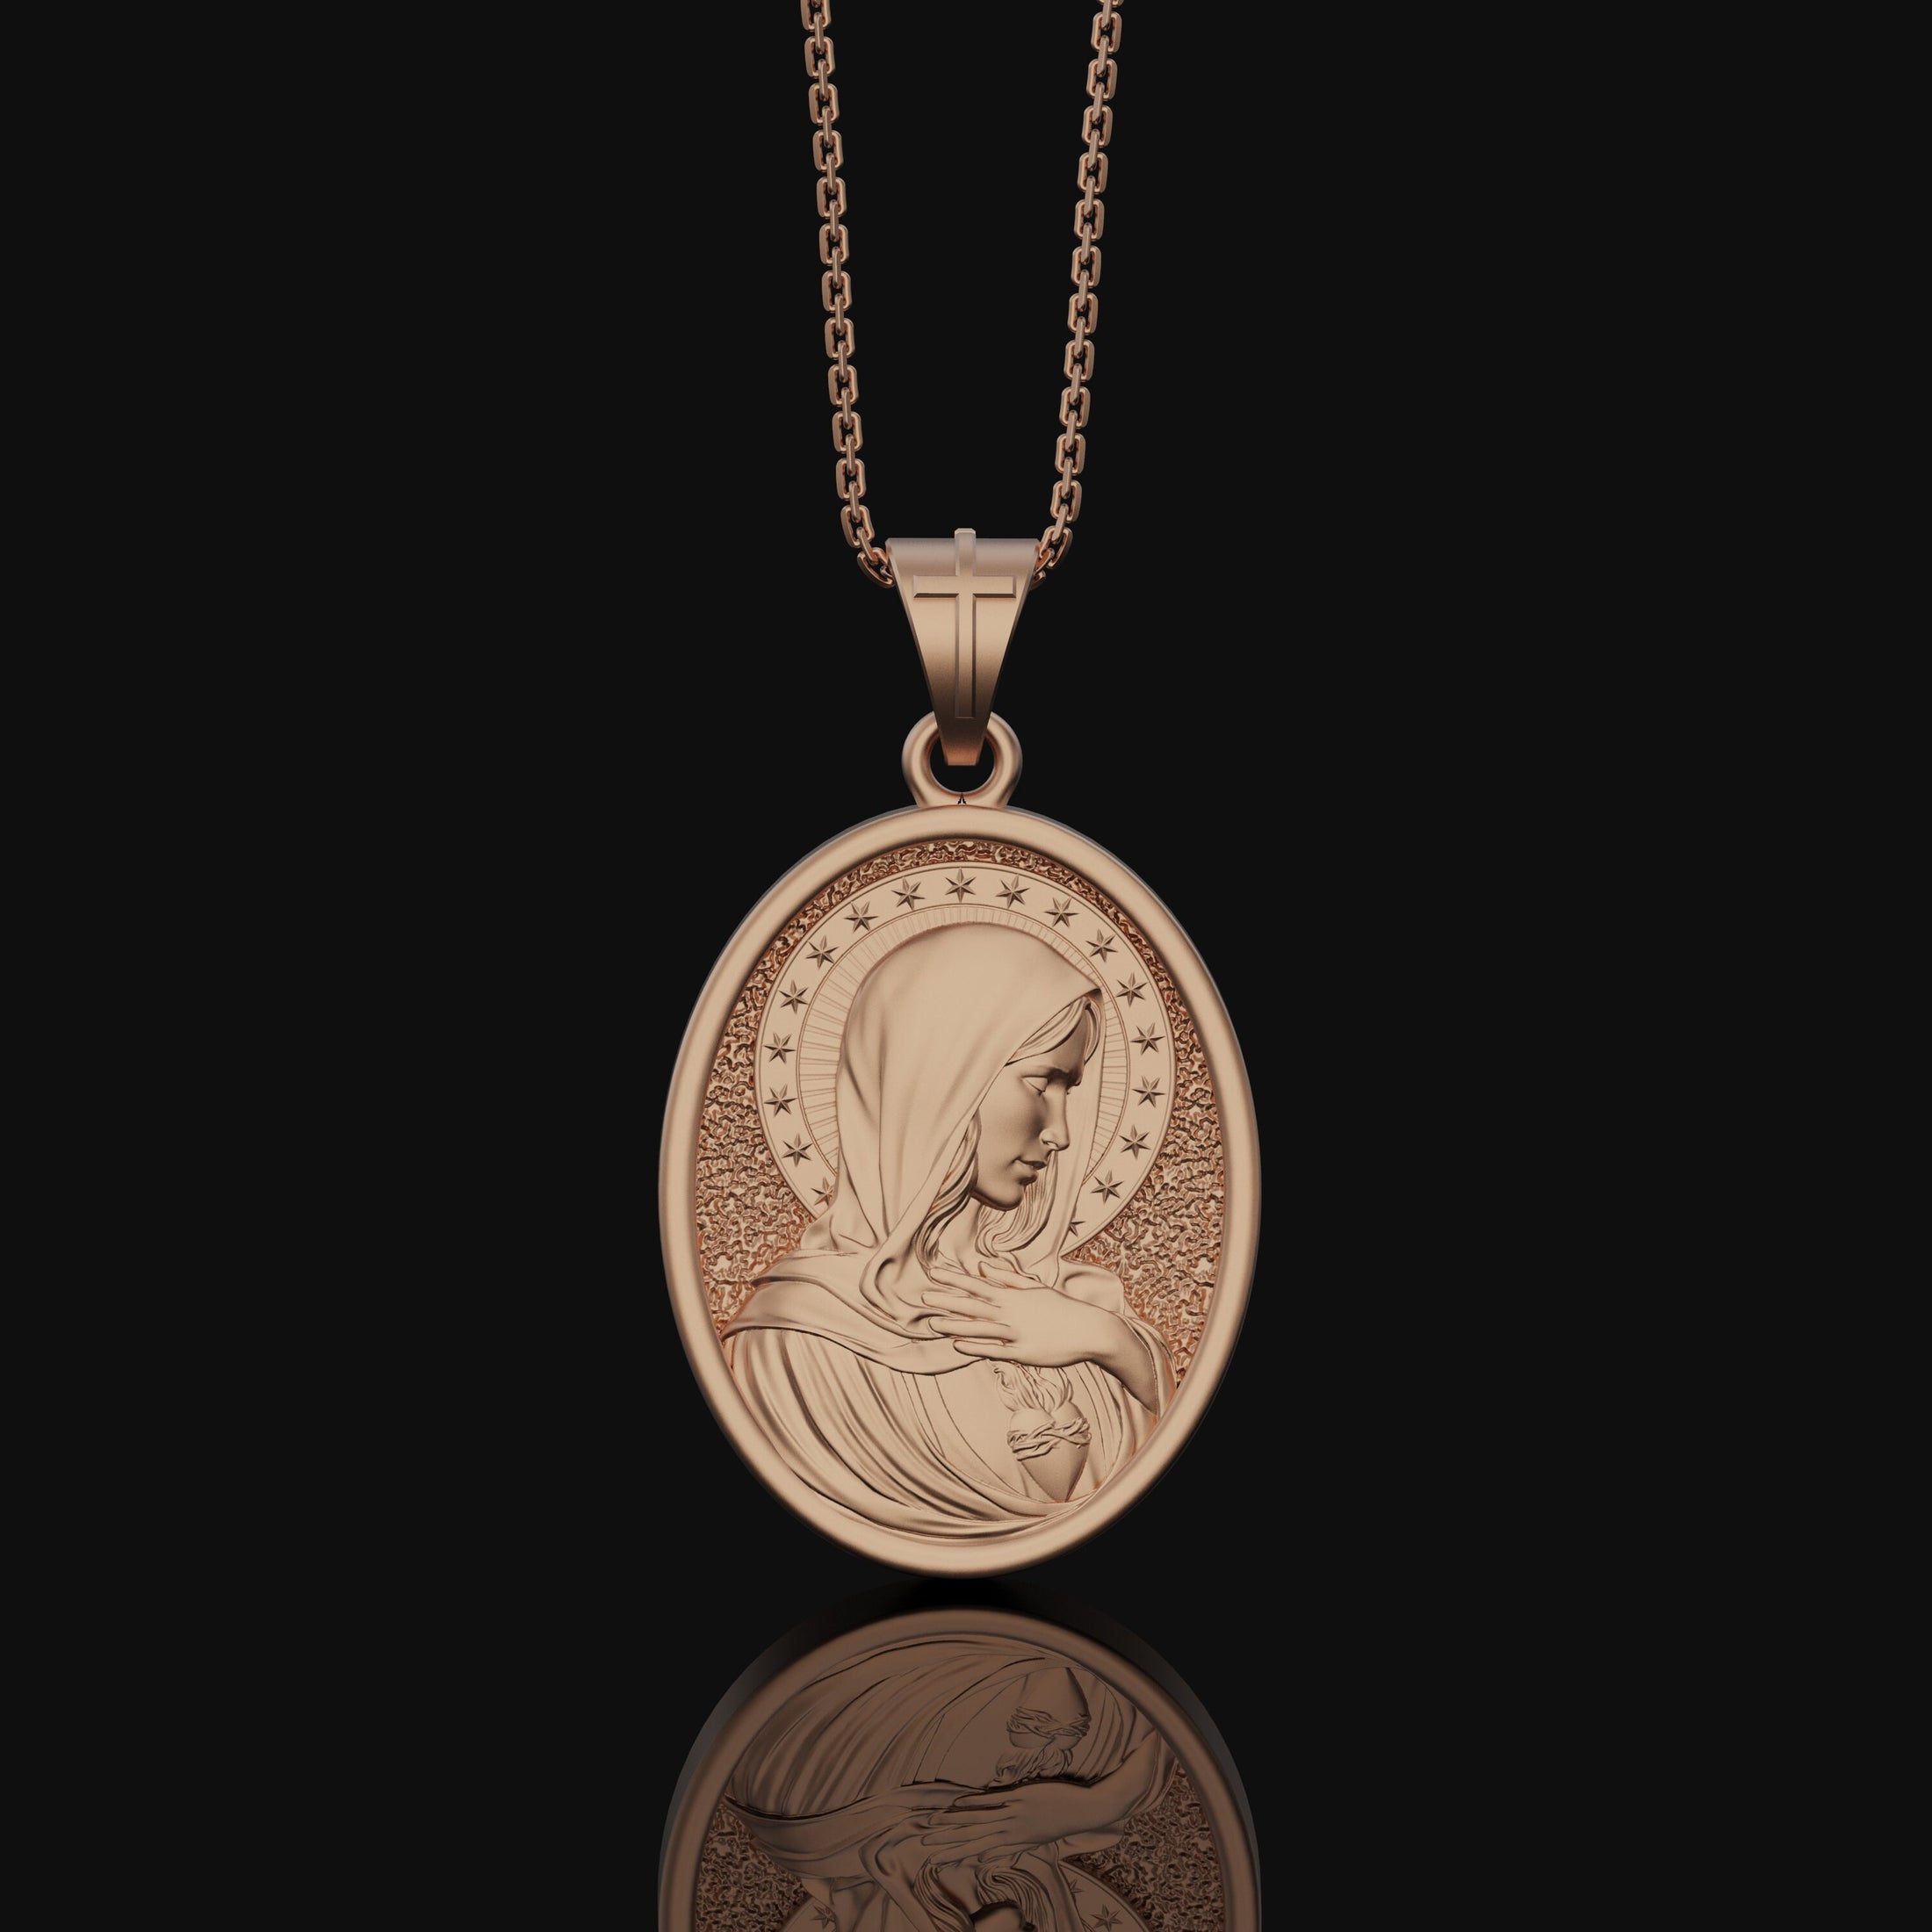 Immaculate Heart, Virgin Mary, Mother Of Jesus, Religious Jewelry, Sacred Heart Medal, Miraculous Medal, Religious Pendant Rose Gold Finish